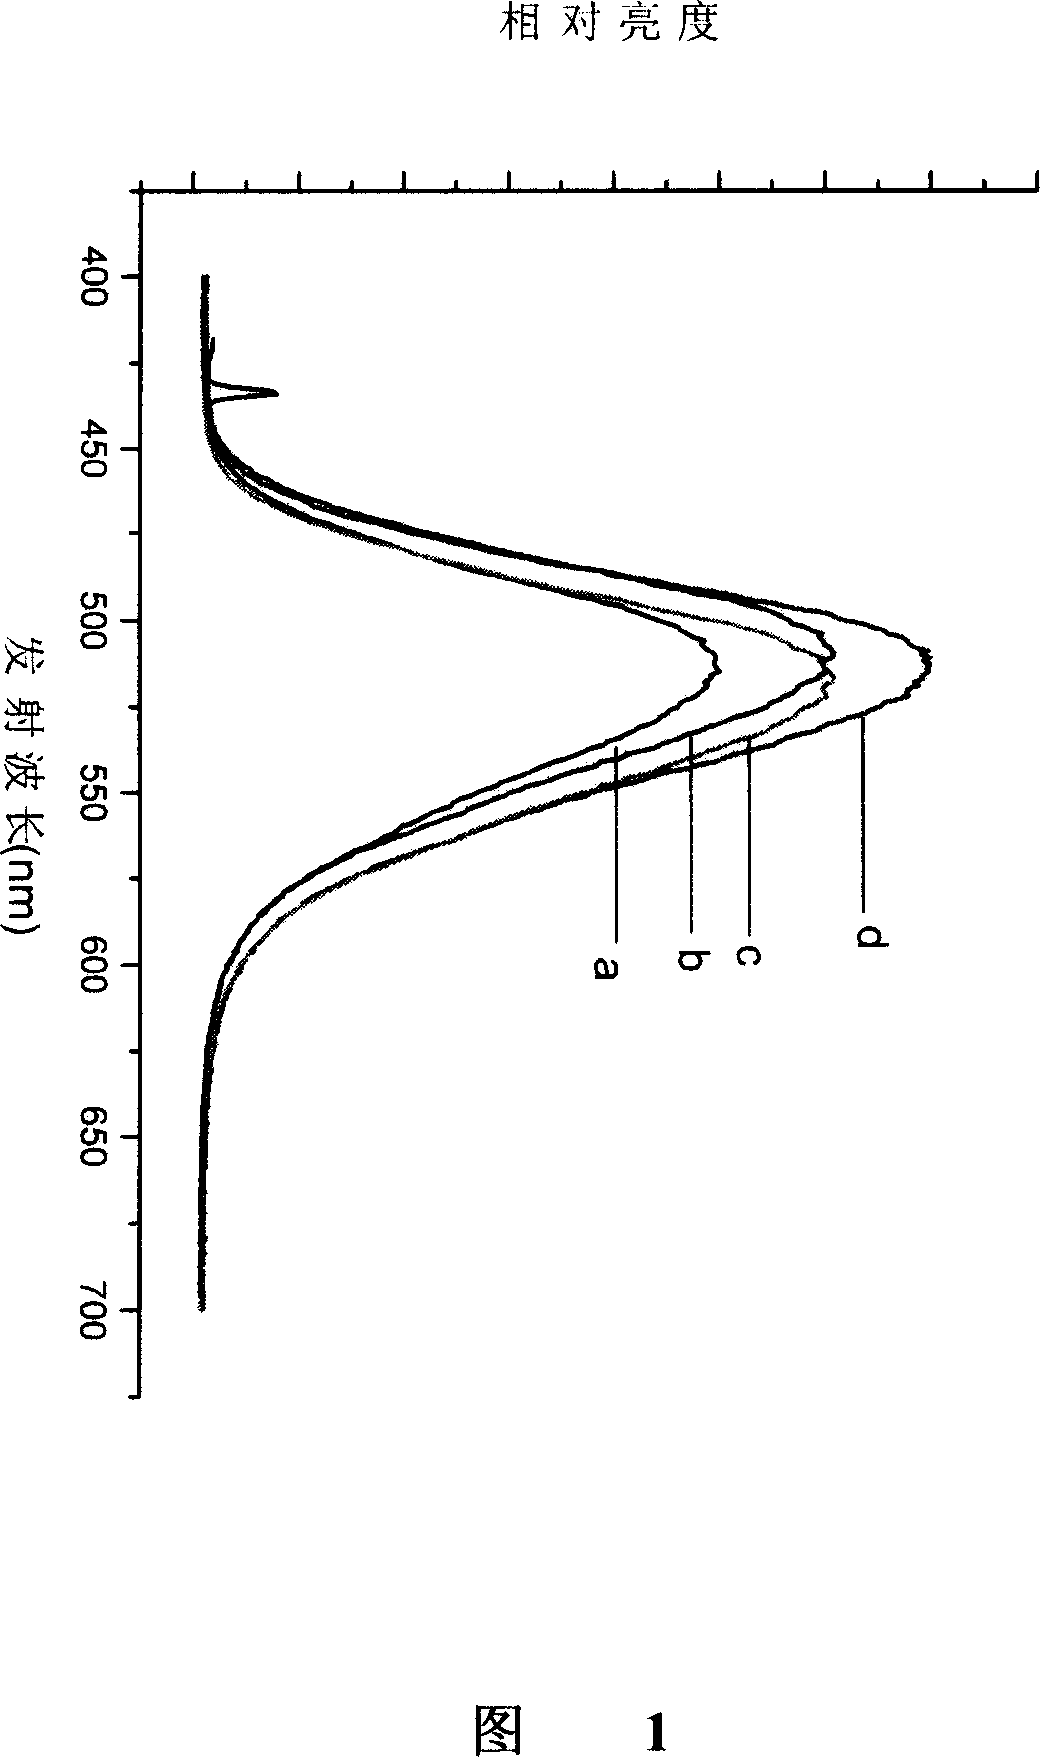 Long-persistence luminescent material and its preparing method